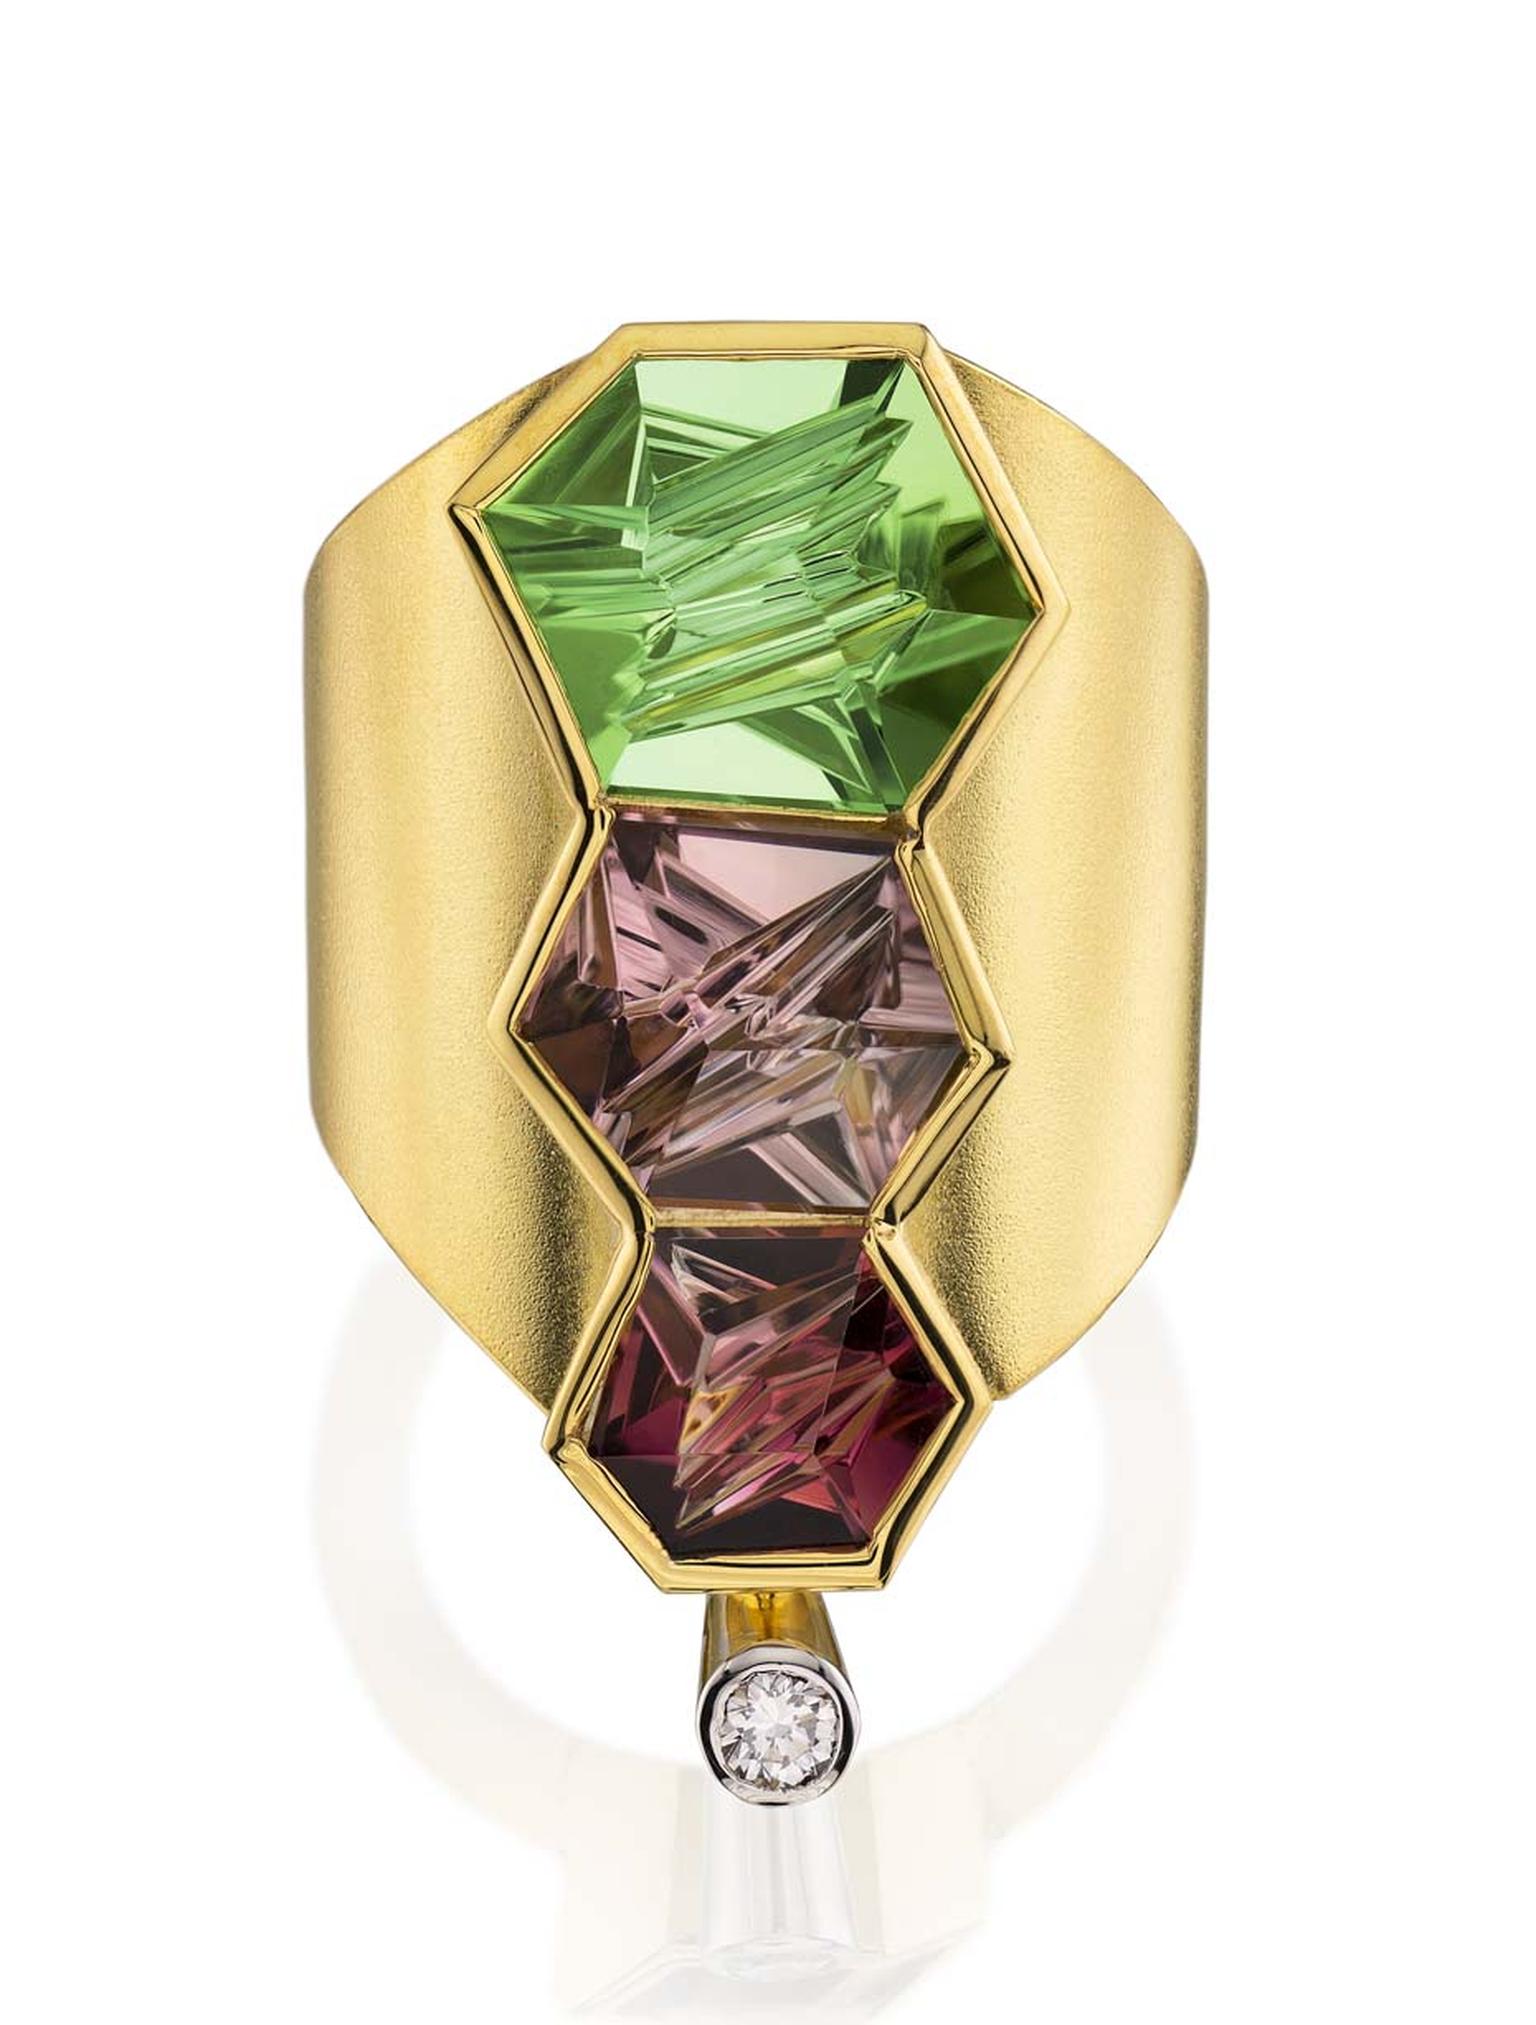 Munsteiner gold and diamond ring featuring three coloured tourmalines cut from within.